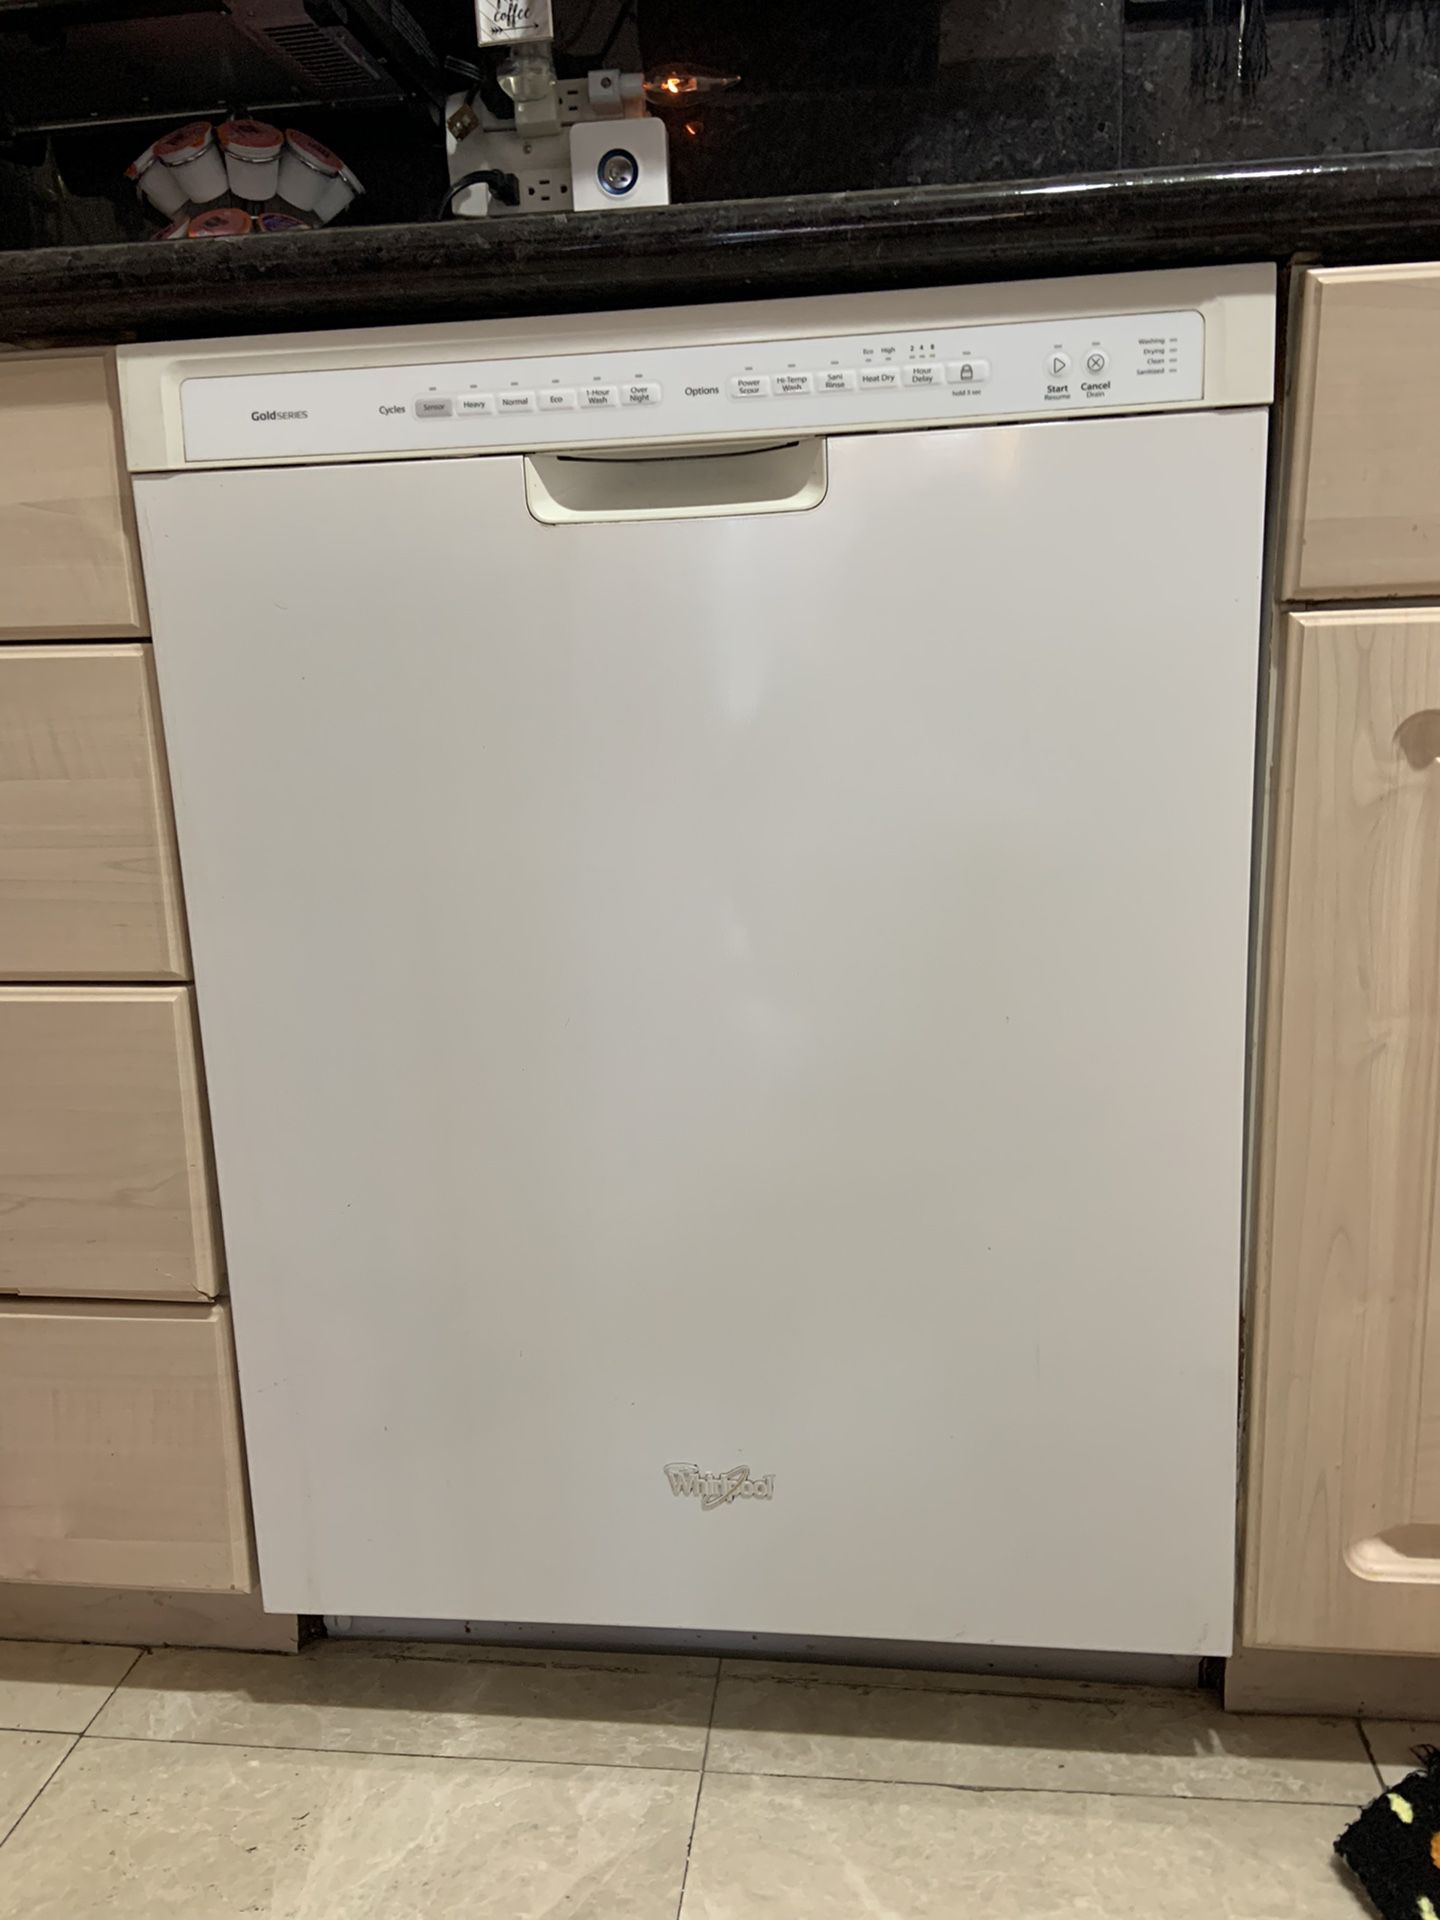 Whirlpool dishwasher top of the line myself getting new appliances never used it but maybe 10 times